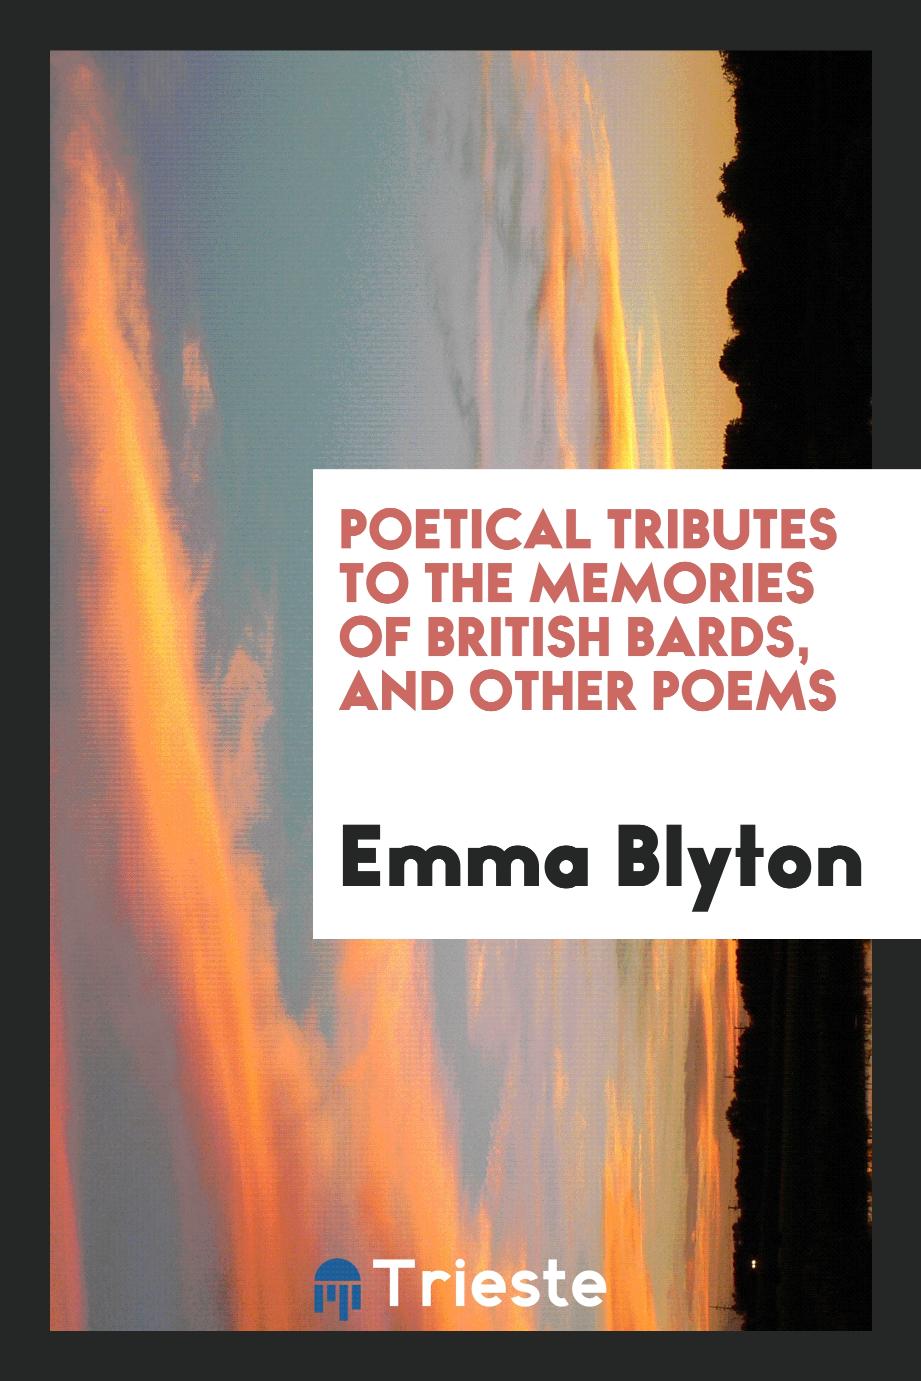 Poetical tributes to the memories of British bards, and other poems